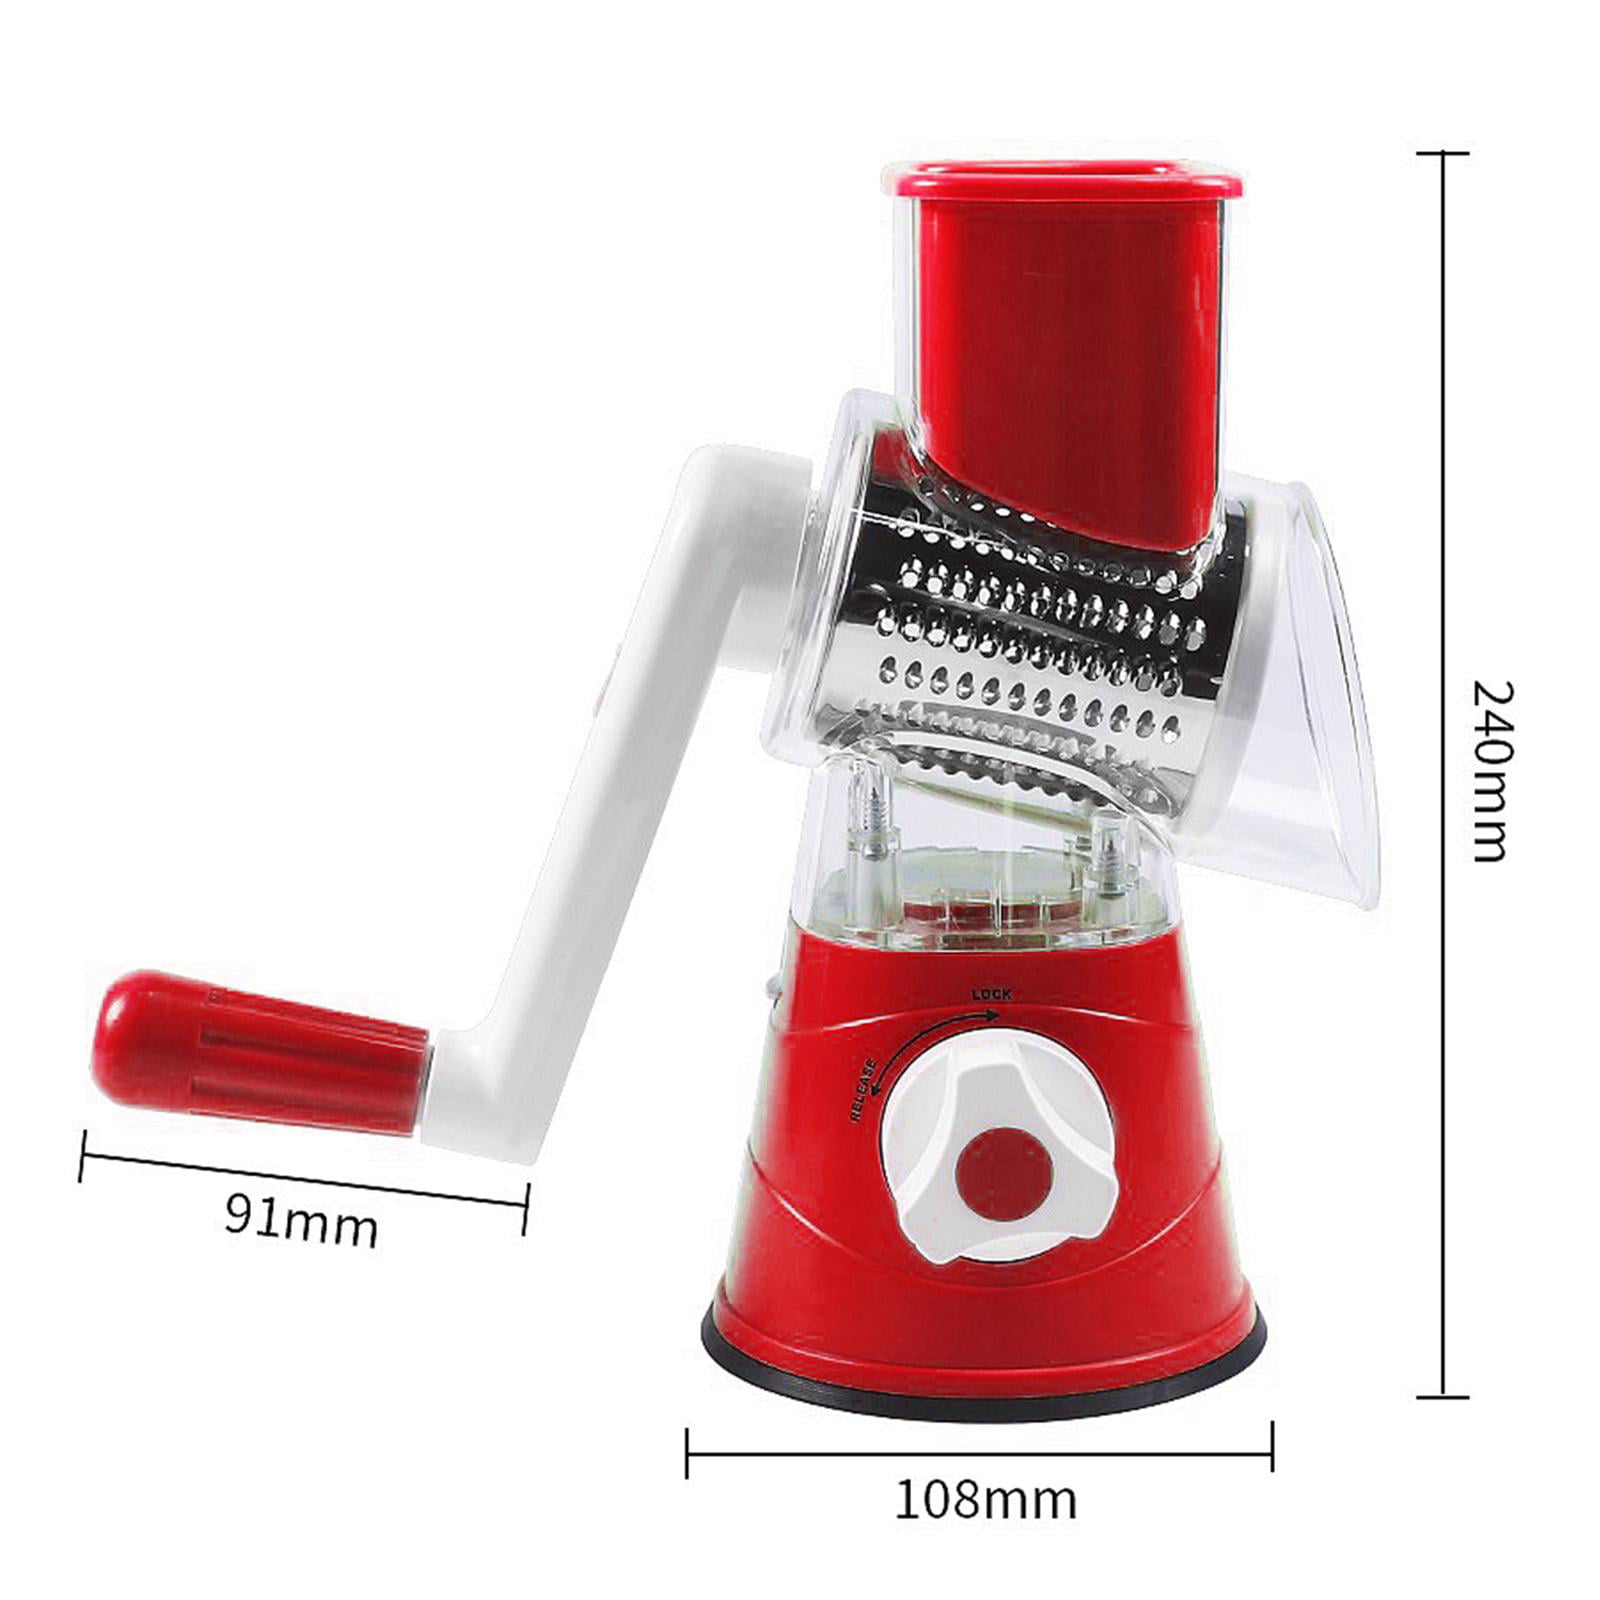 Vegetable Slicer, Fitnate Hand Crank Stainless Steel Fruit Vegetable  Shredder Dicer Cutter With 2 Changeable Stainless Steel Rotary Blades Drum